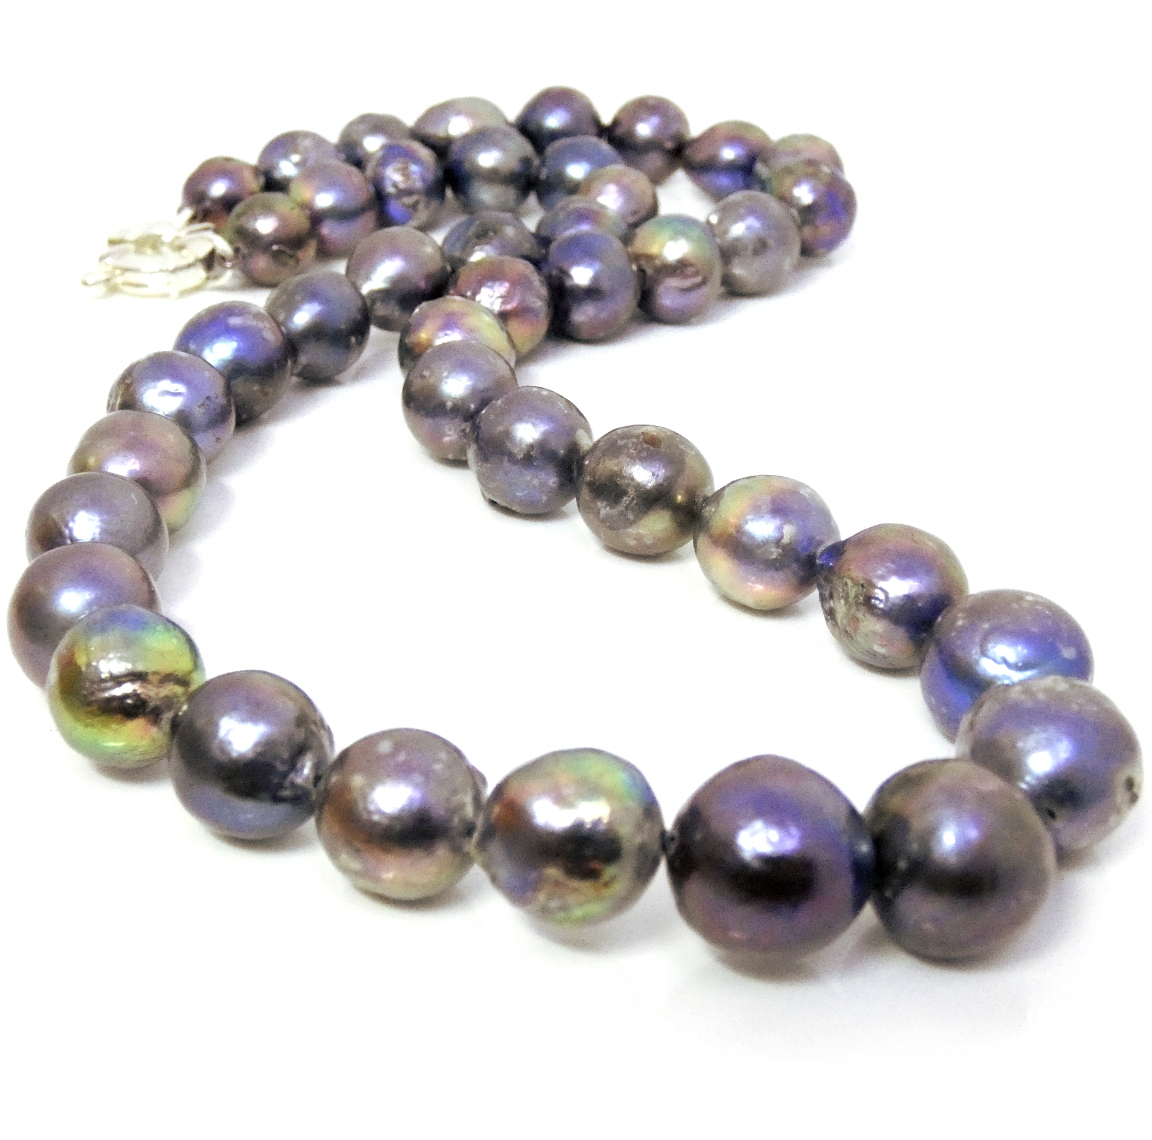 Black 11.3-12.5mm Ripple Pearls Necklace